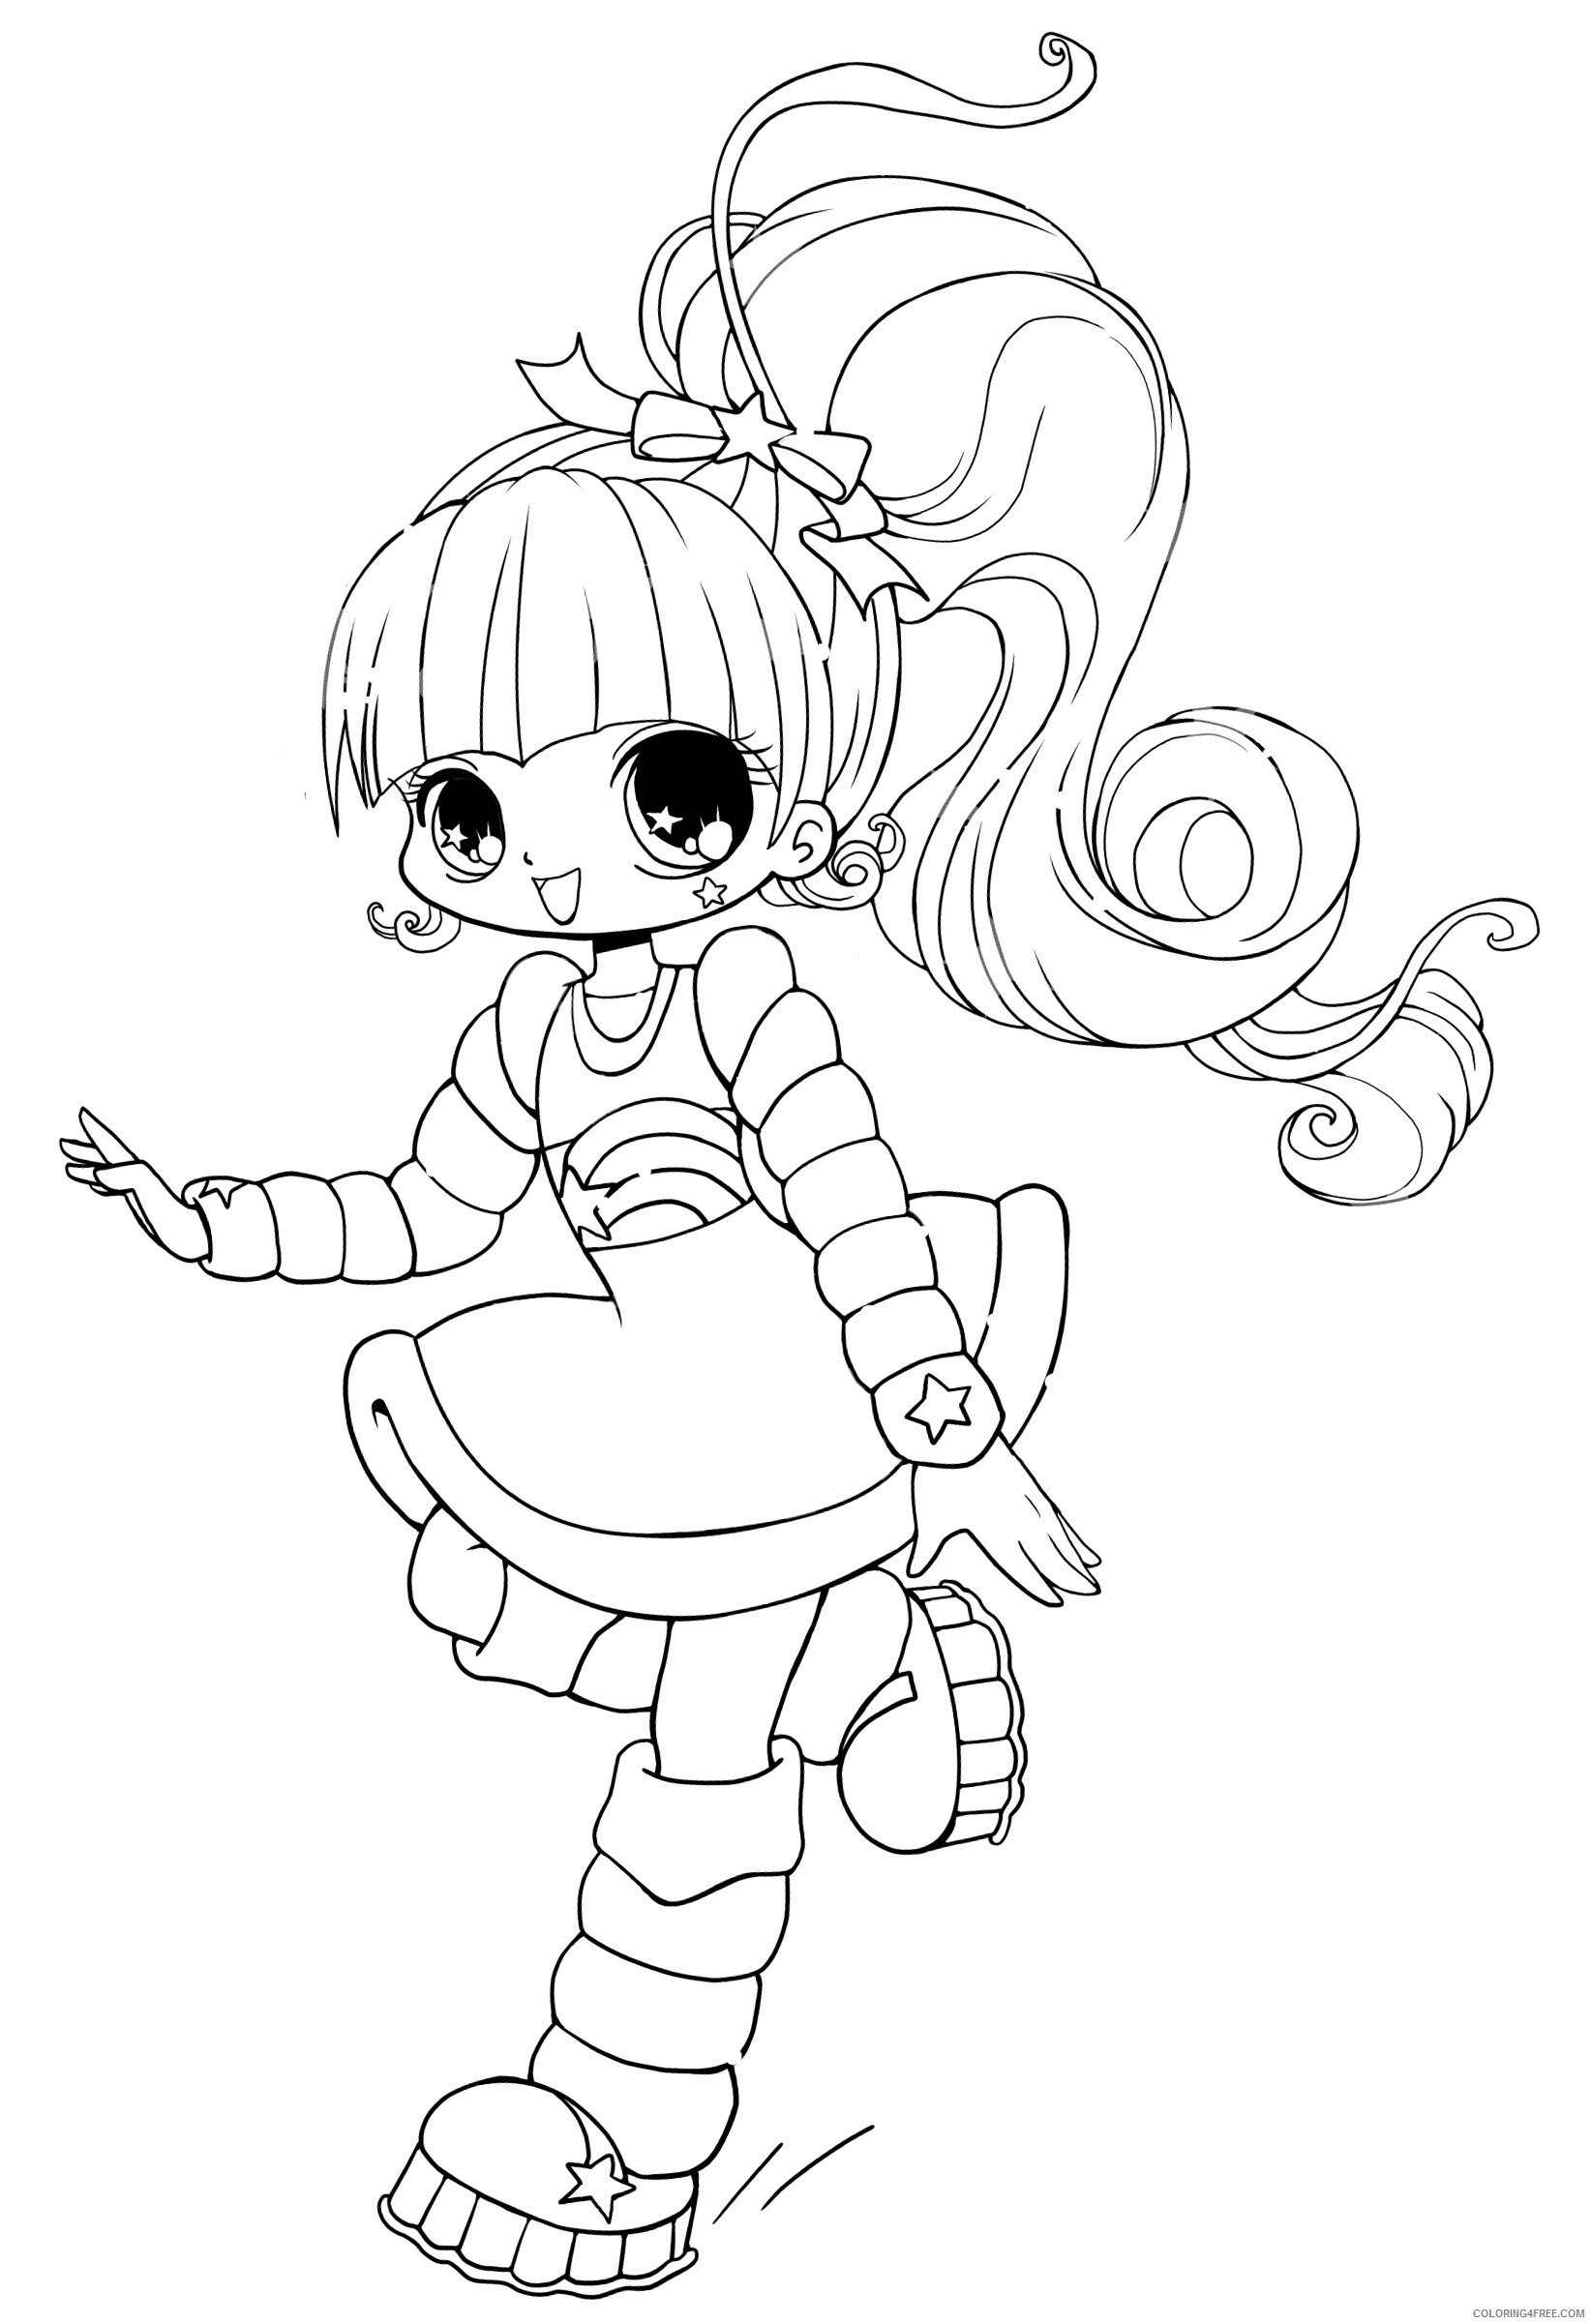 Chibi Printable Coloring Pages Anime Cute Chibi 2021 0104 Coloring4free